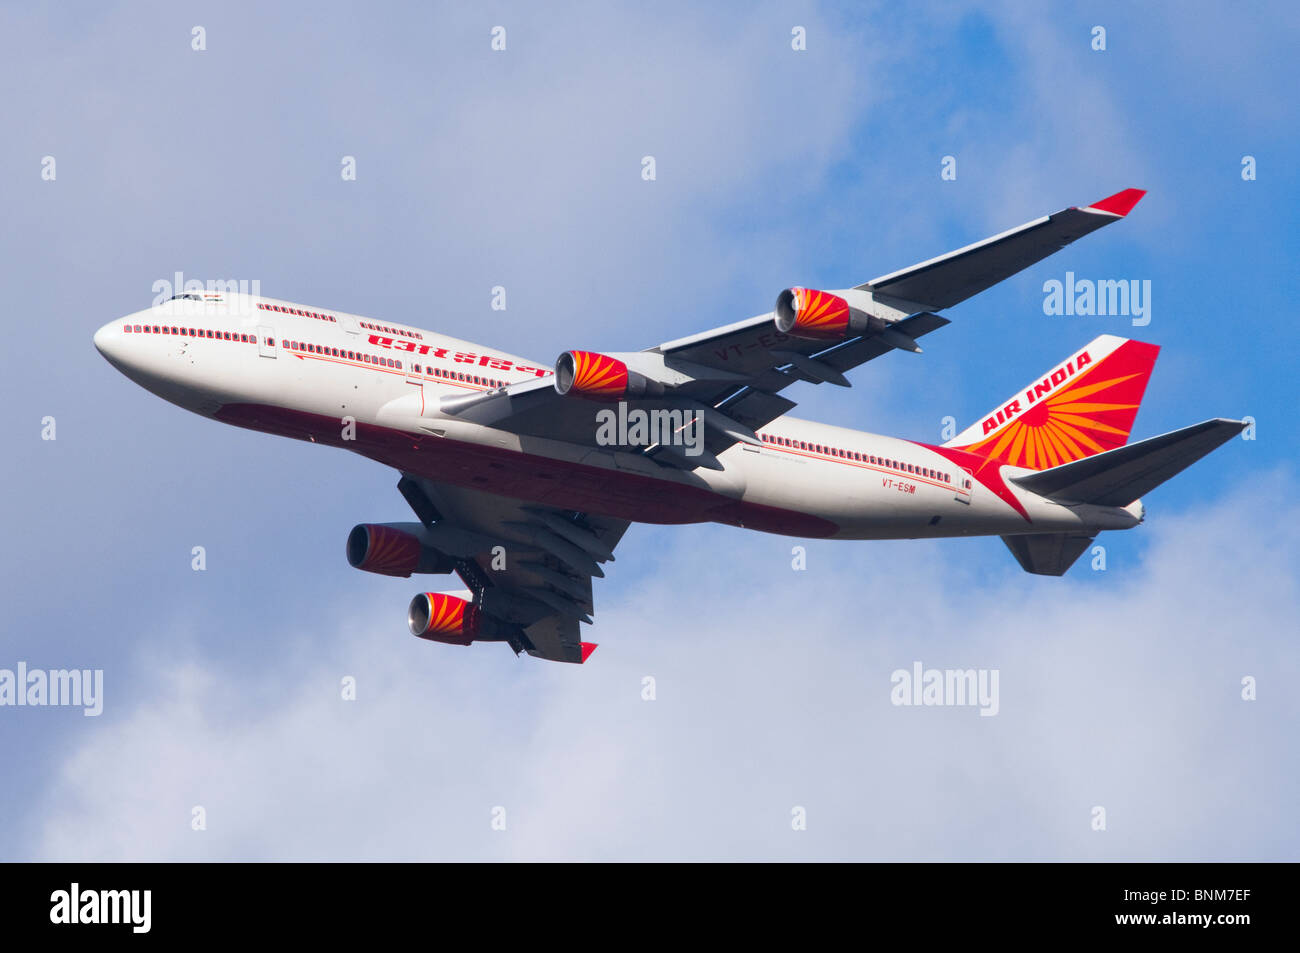 Boeing 747 operated by Air India climbing out from take off at London Heathrow Airport, UK. Stock Photo